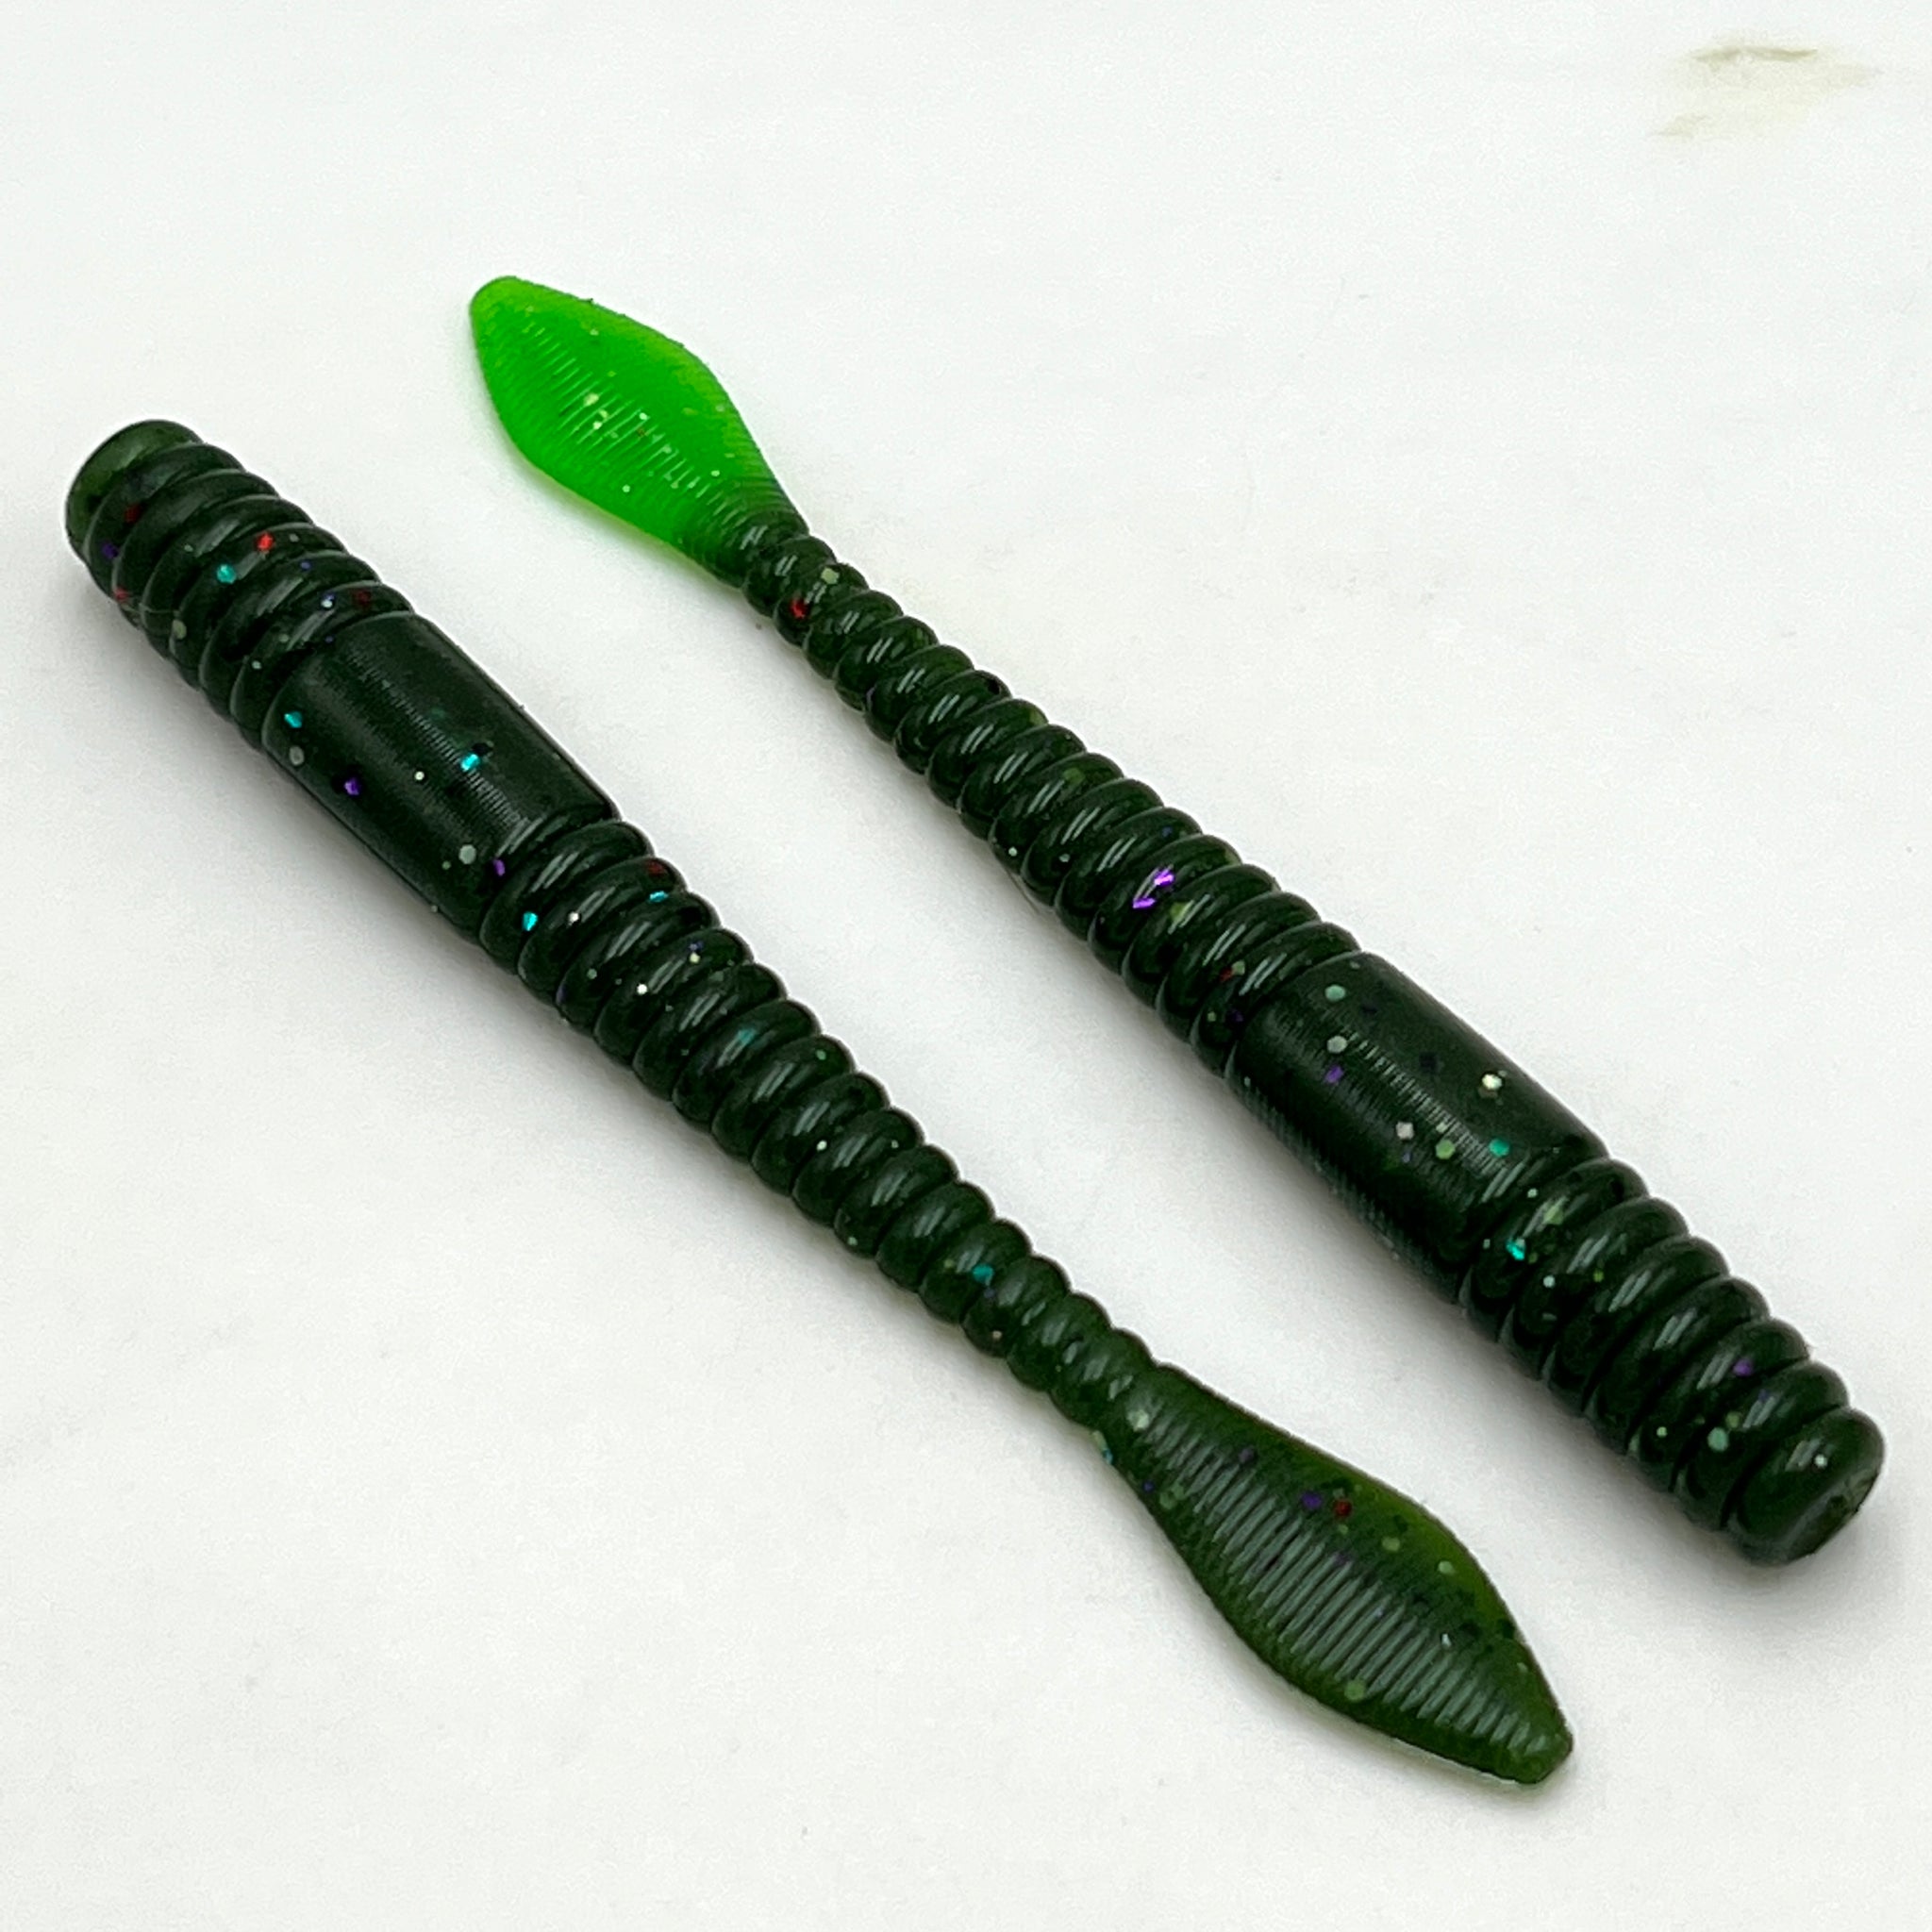 4 Paddle Tail Worm Mold